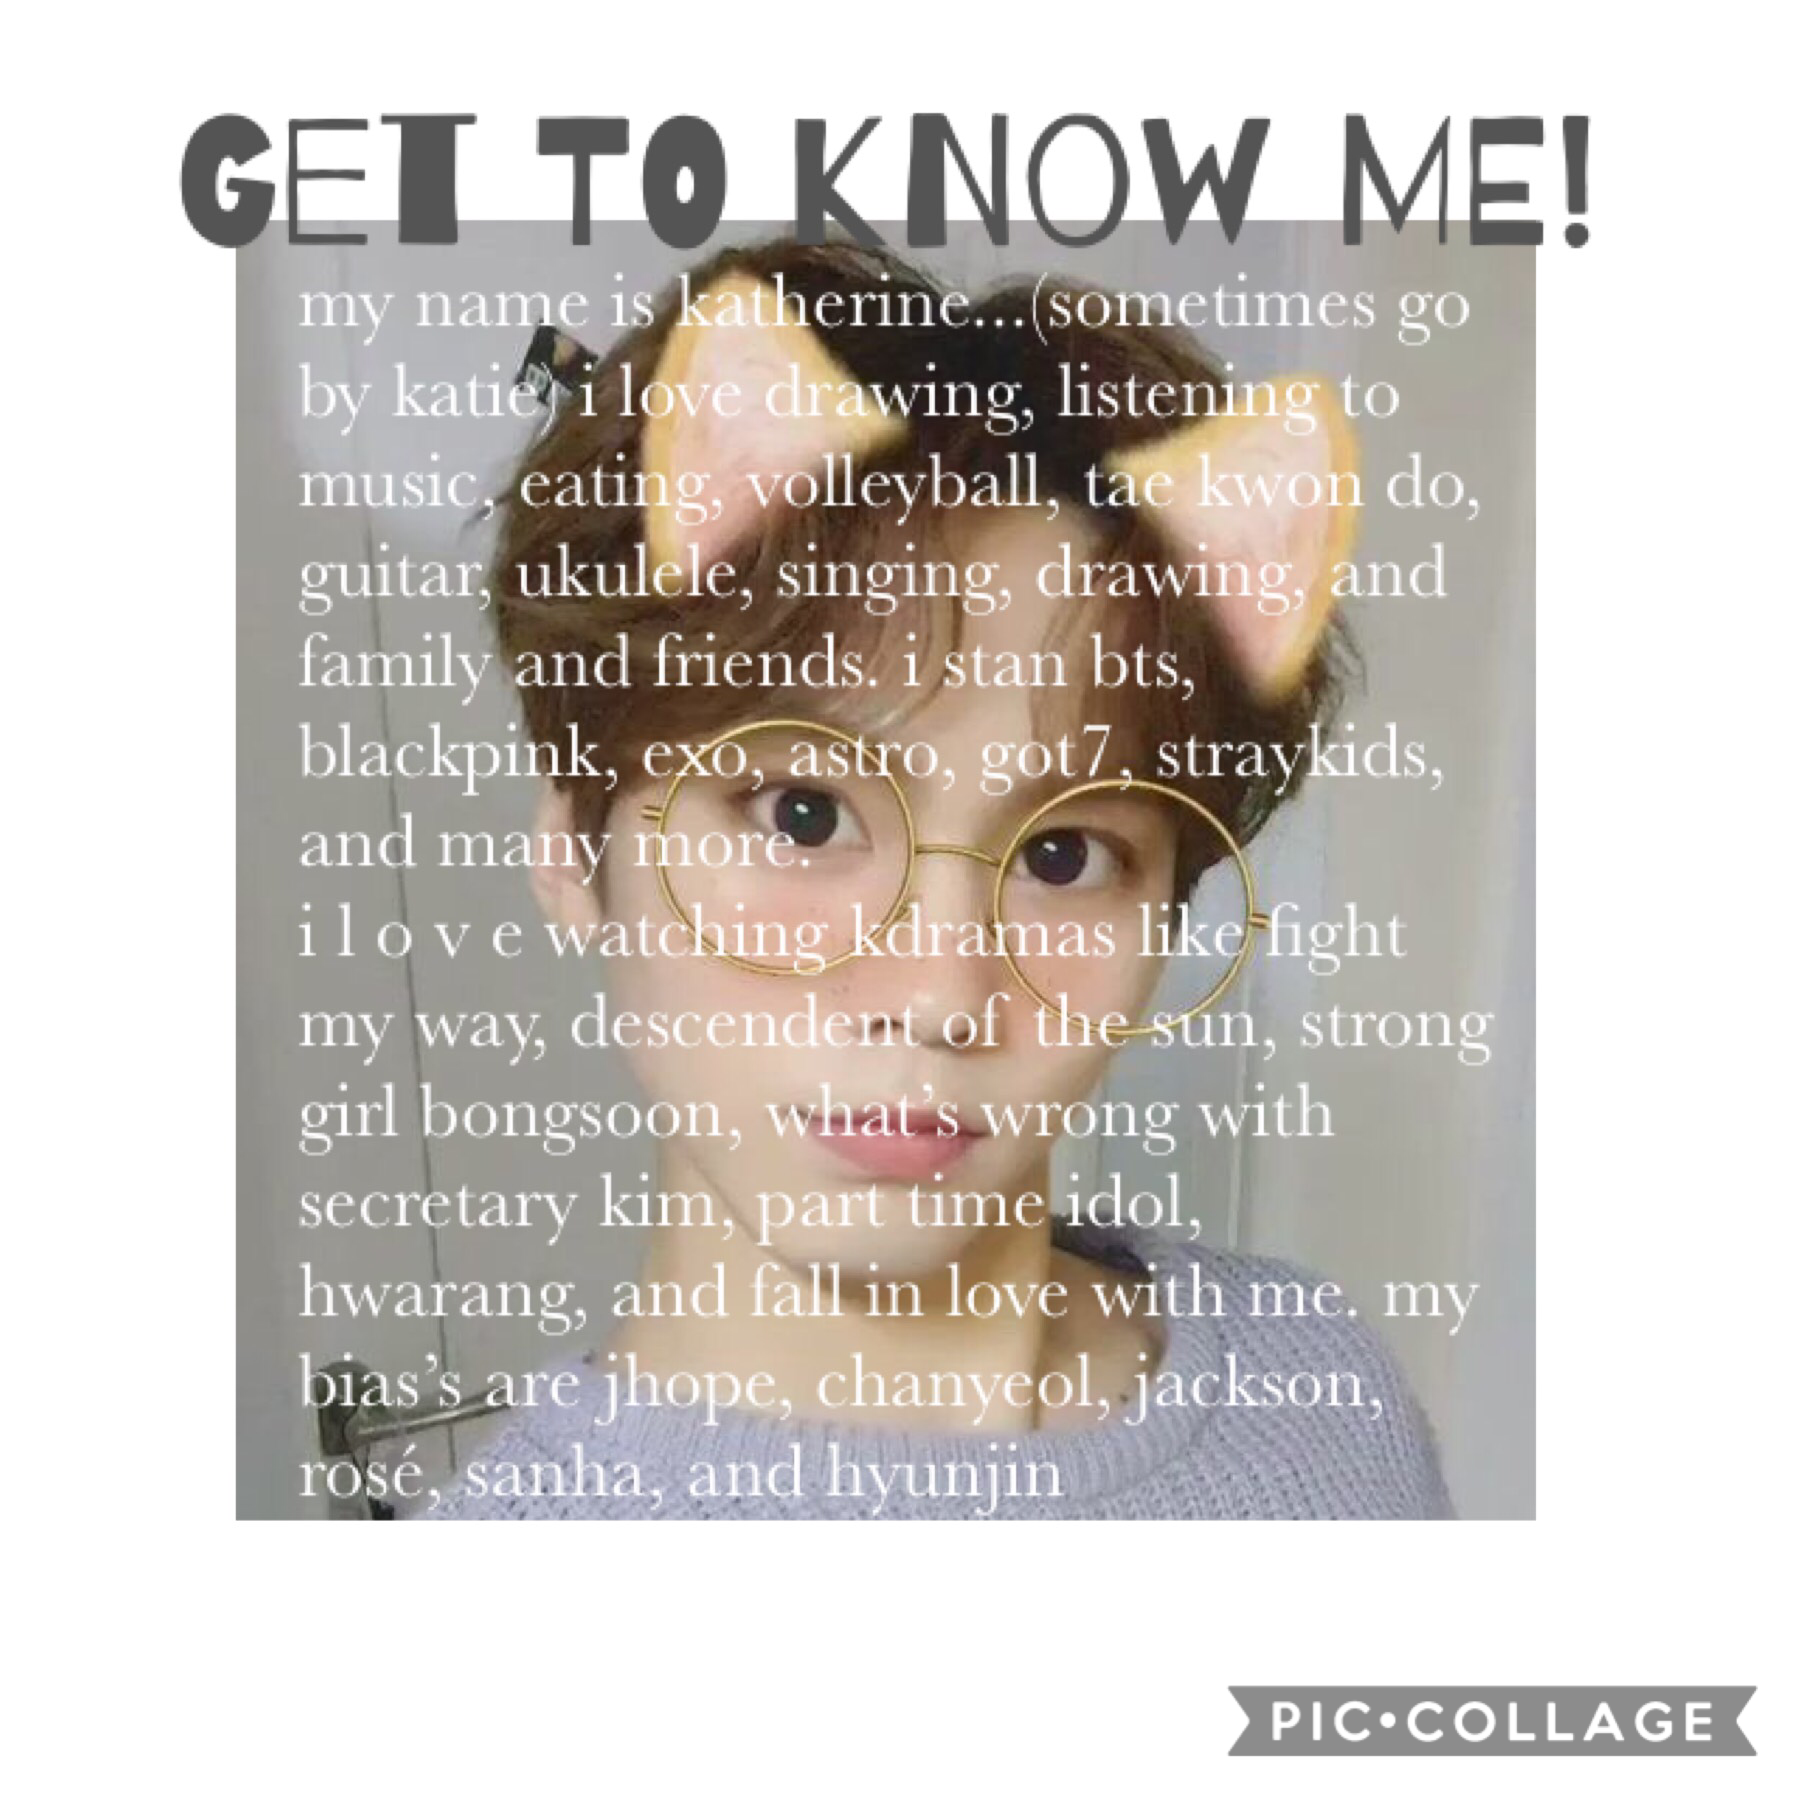 get to know me!